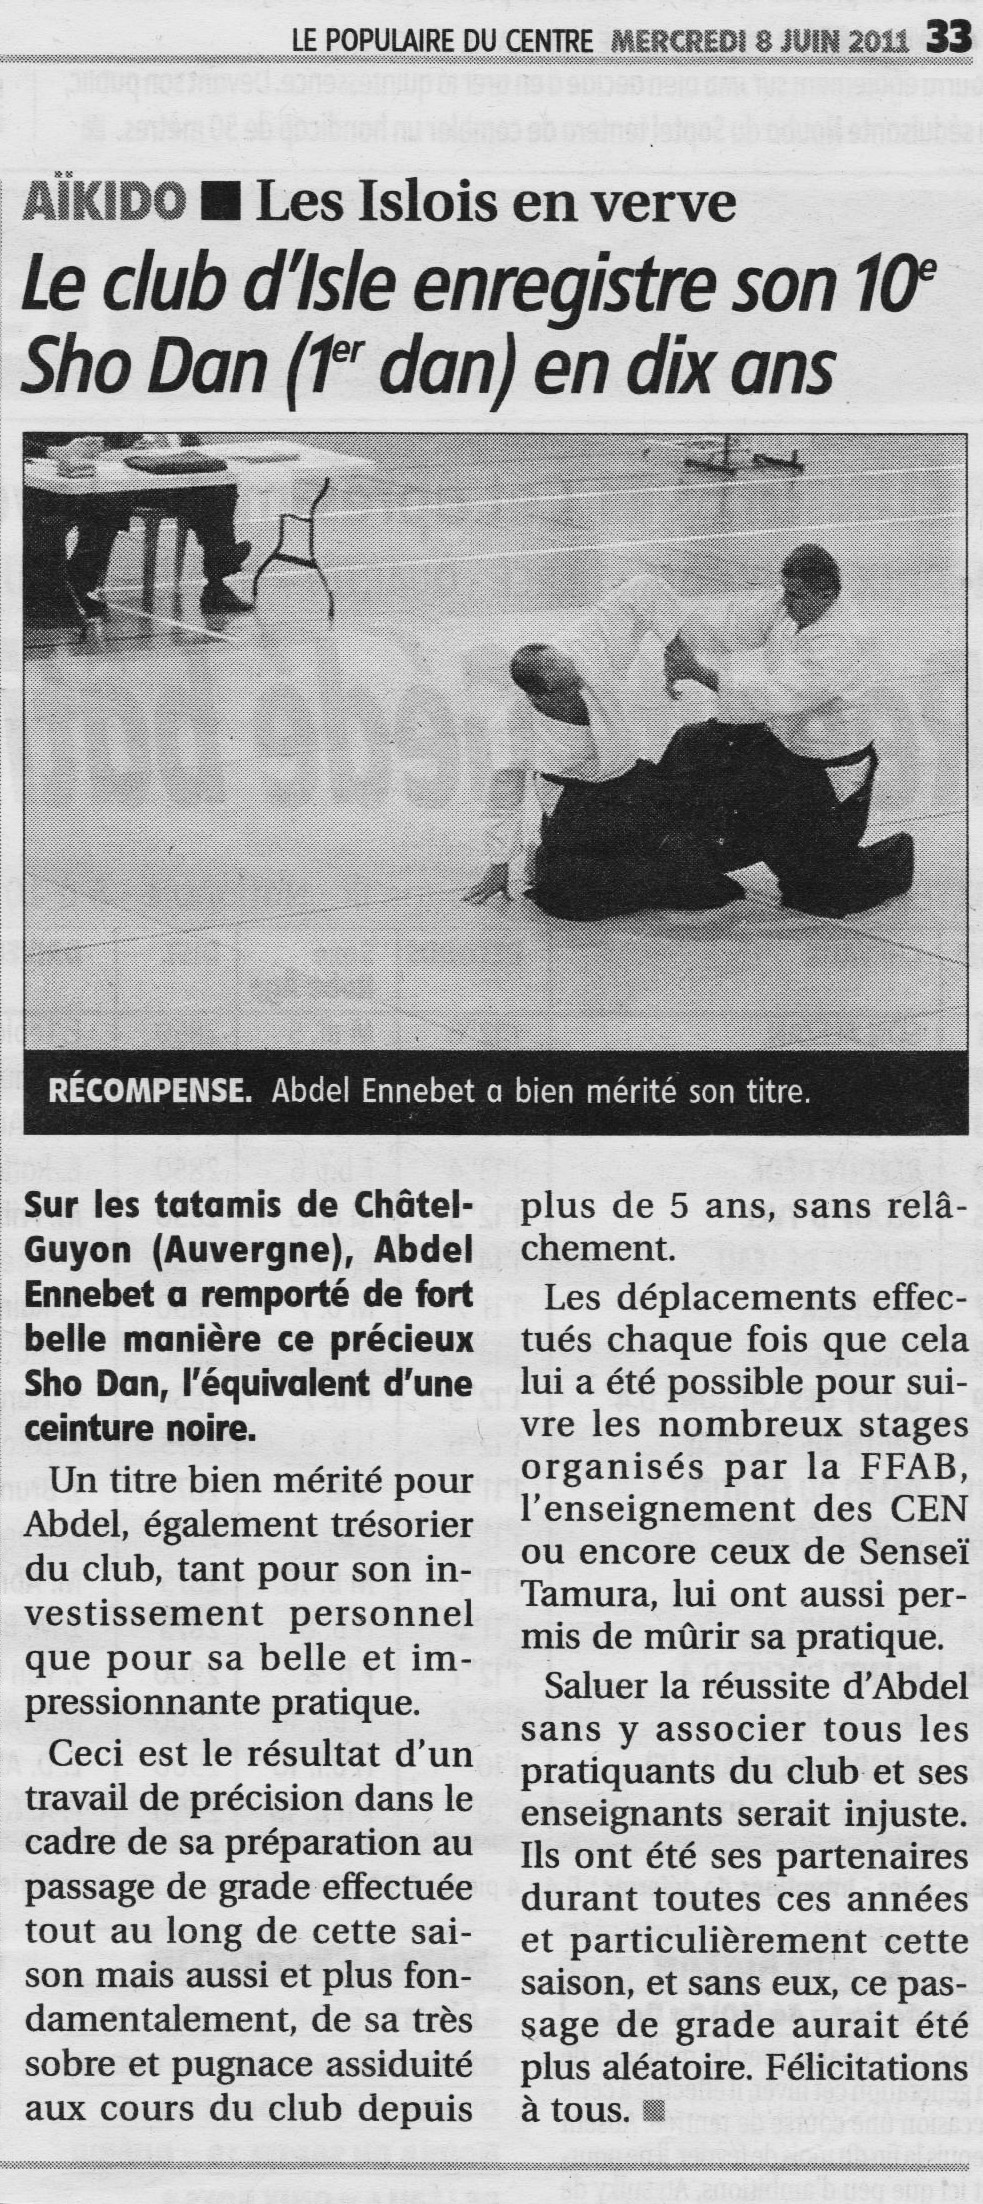 110604 Article Populaire.jpg - 789,00 kB